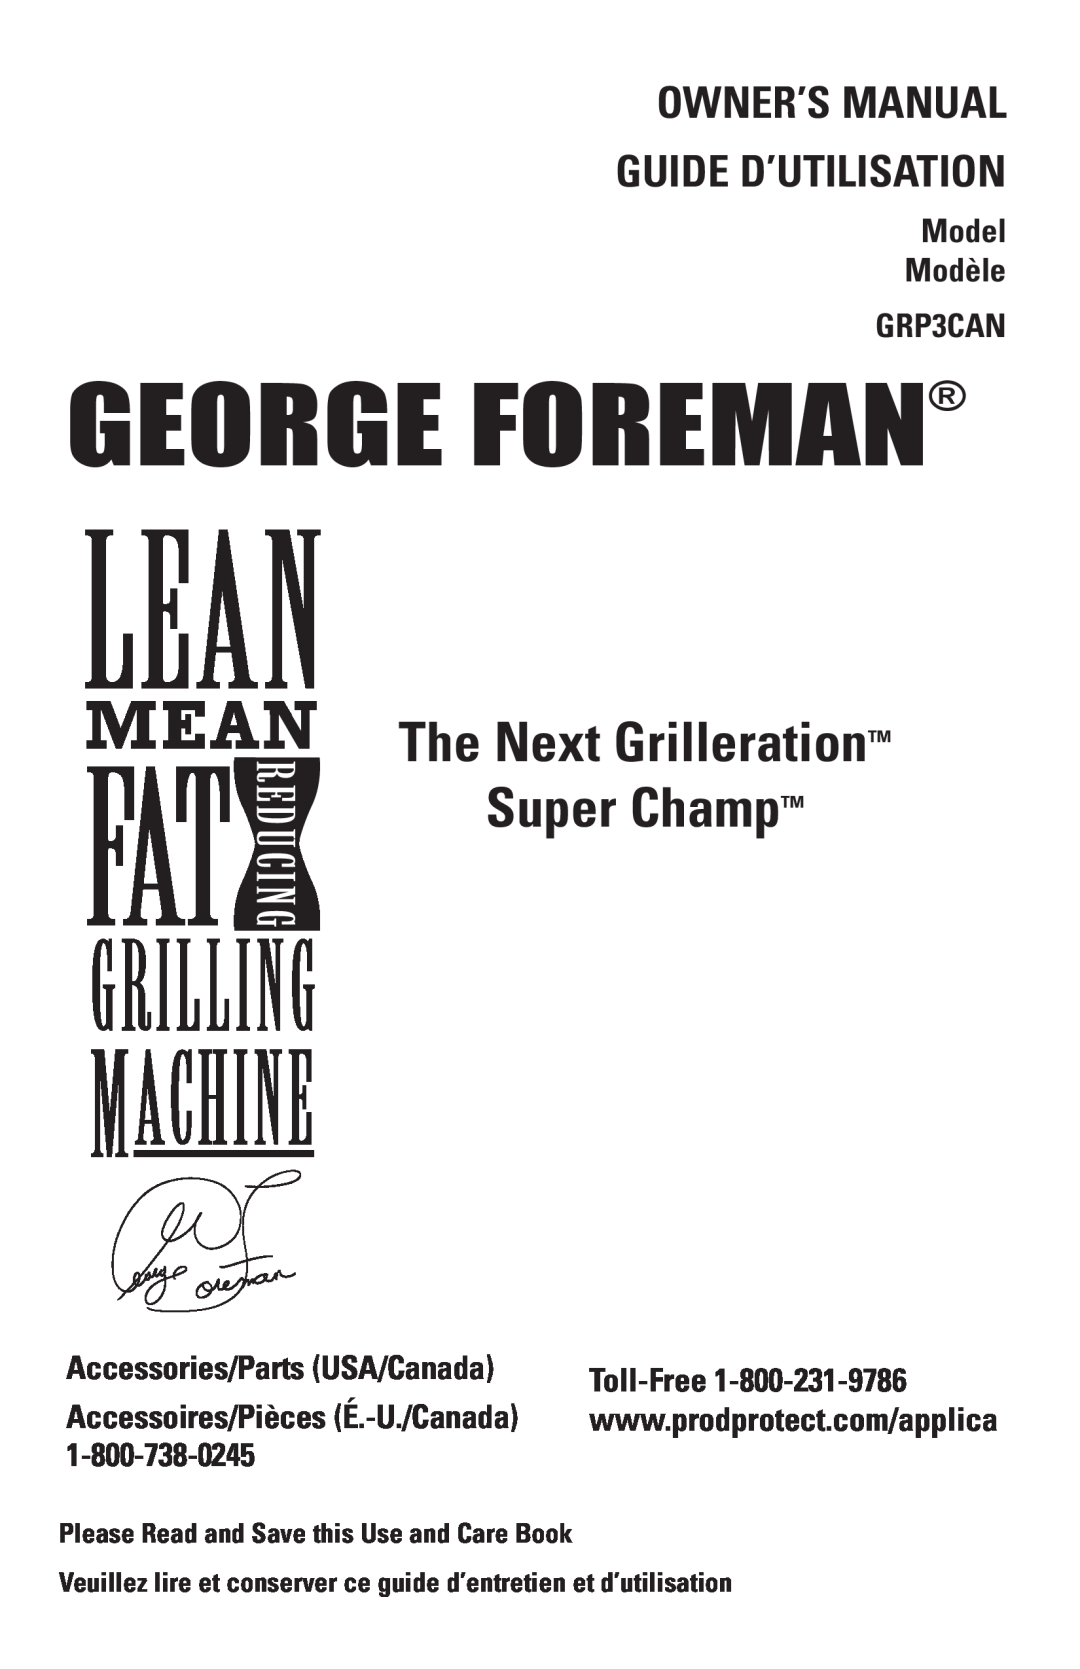 George Foreman owner manual The Next Grilleration Super Champ, Model Modèle GRP3CAN, Accessories/Parts USA/Canada 